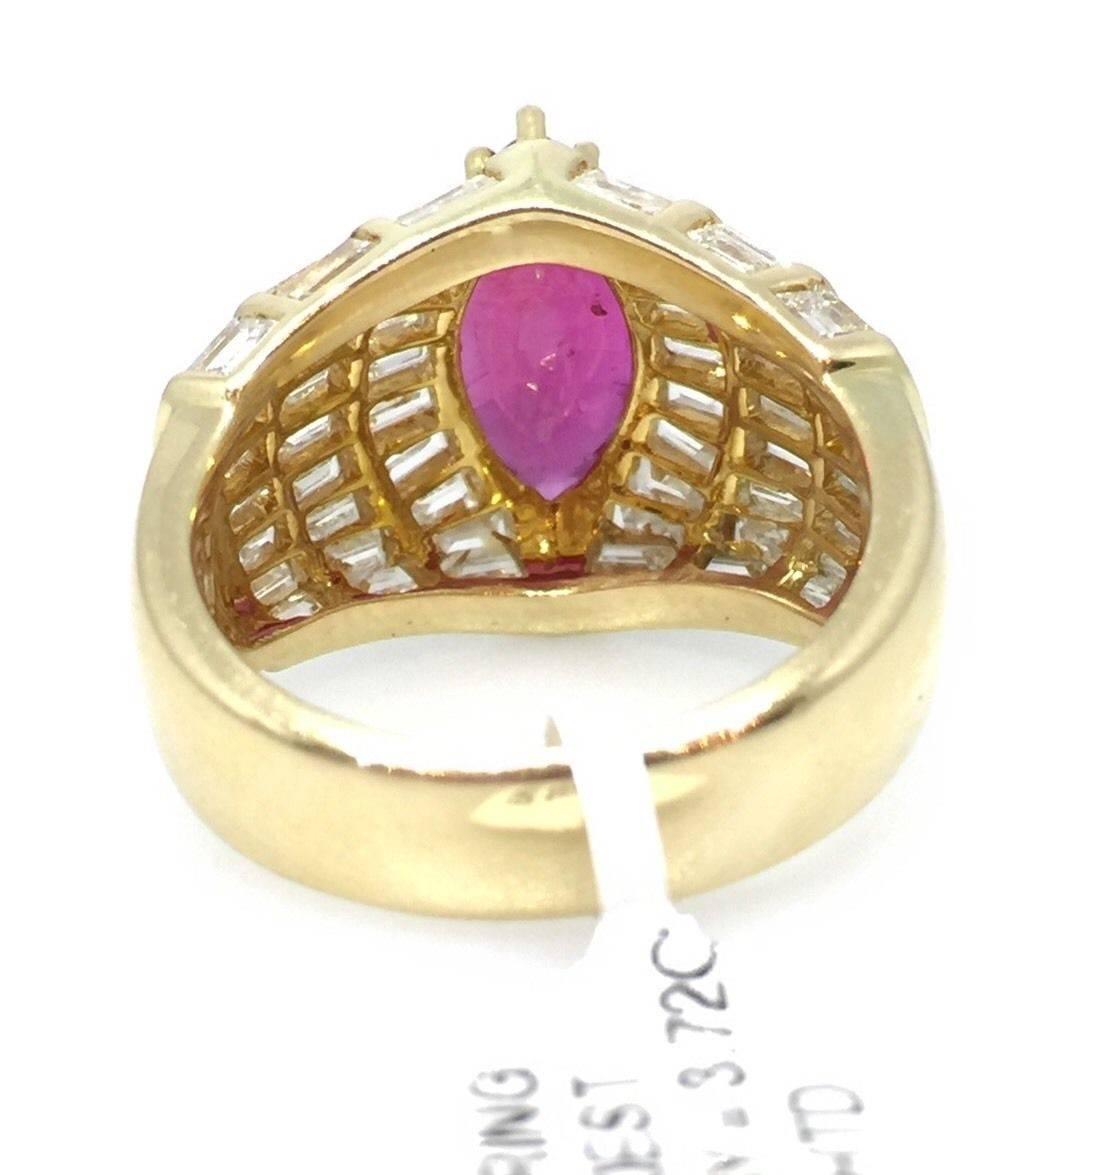 3.72 Carat GIA Cert Marquise Shaped Ruby Diamond Gold Ring  In Excellent Condition For Sale In La Jolla, CA